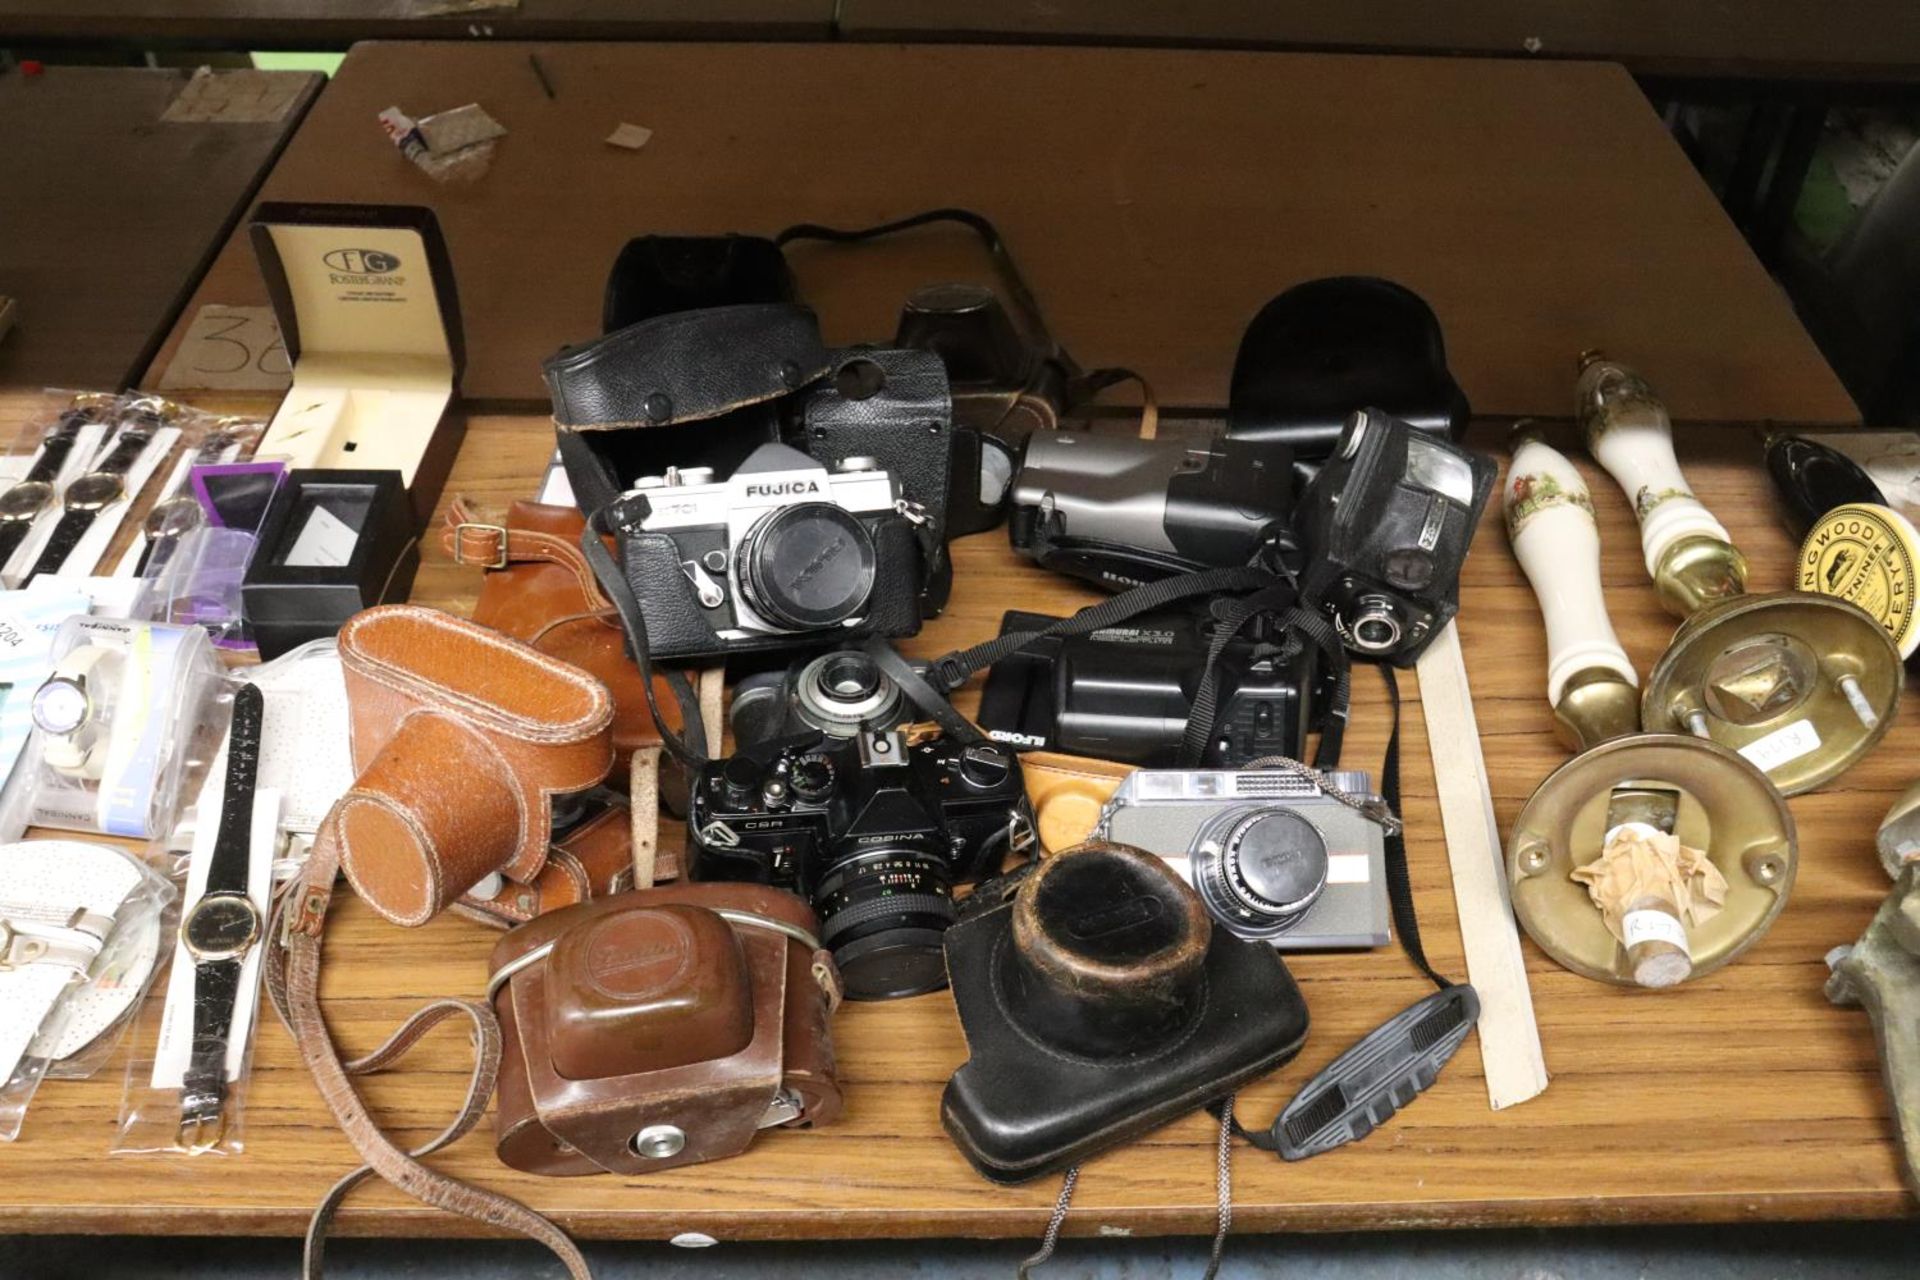 A COLLECTION OF VINTAGE CAMERAS TO INCLUDE COSINA CSR, ENSIGN FUL-VUE, FUJICA ST701, ROBOT STAR,